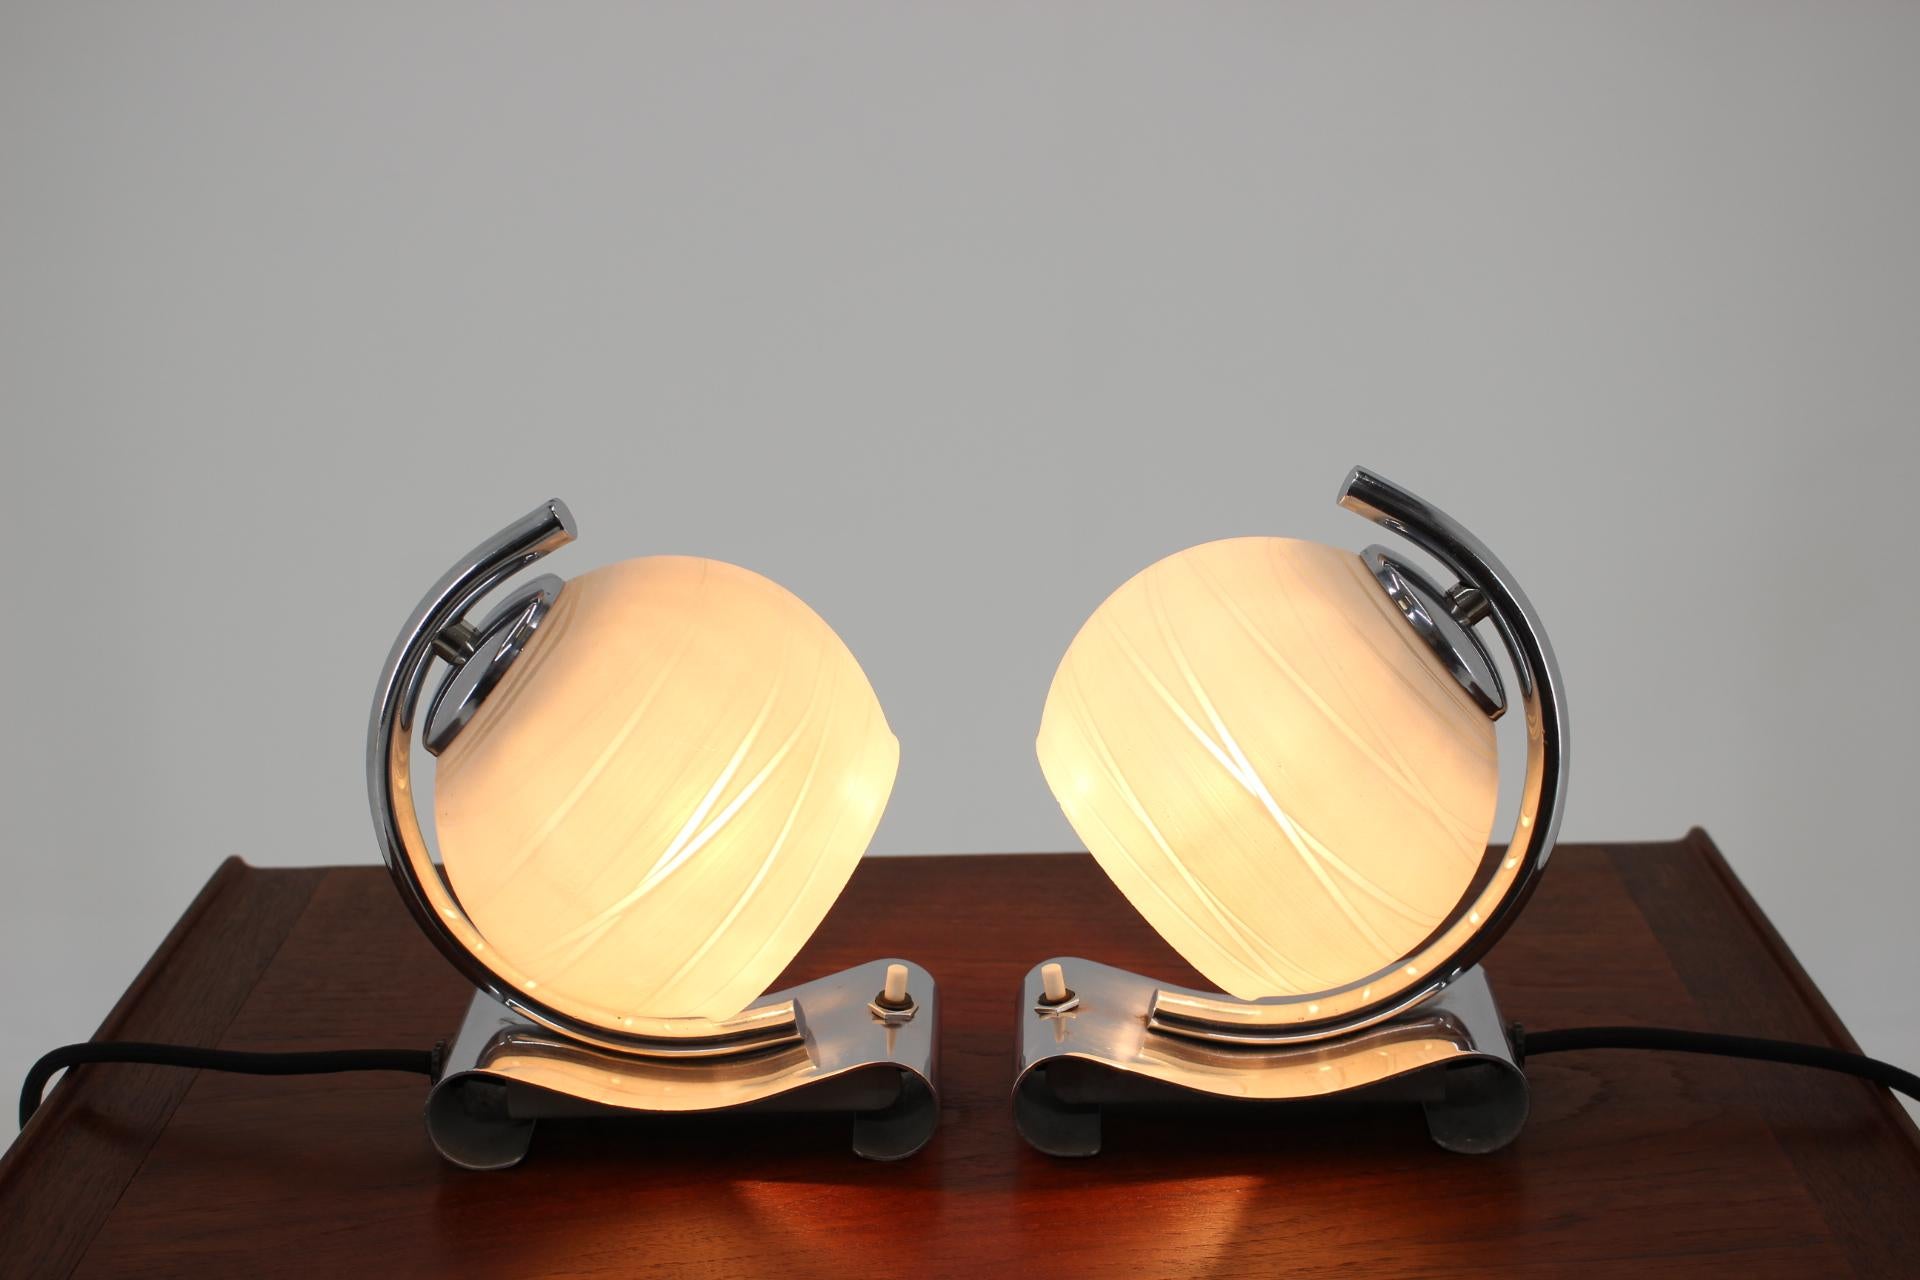 Set of Two Art Deco Table Lamps, Napako-15, Type 1188 For Sale 2